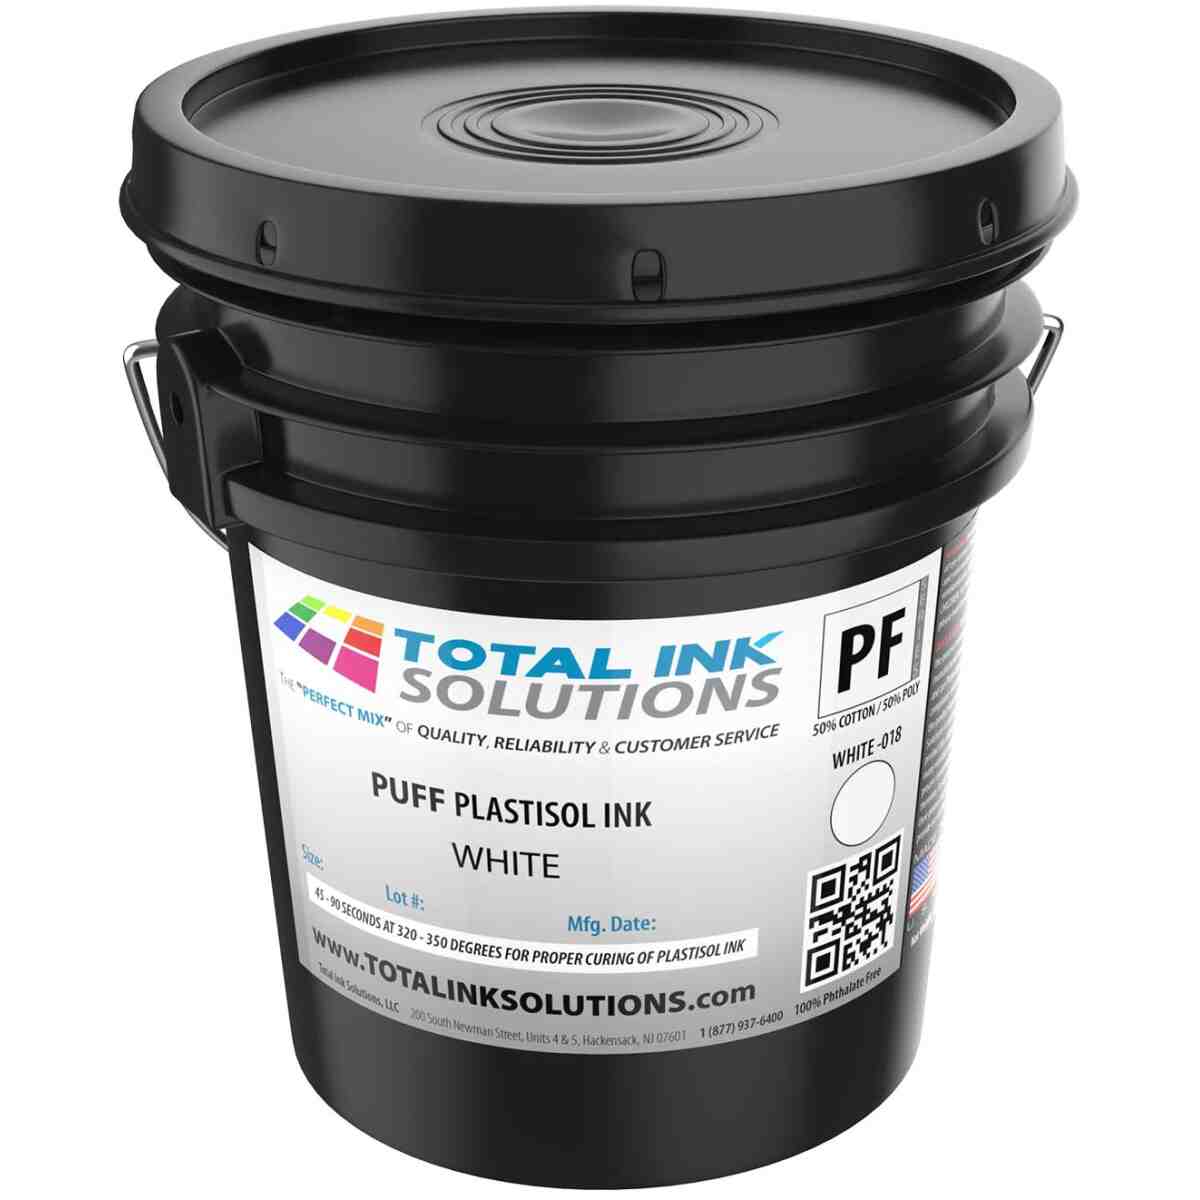 Puff Plastisol Ink - White - 5 Gallon TOTAL INK SOLUTIONS®